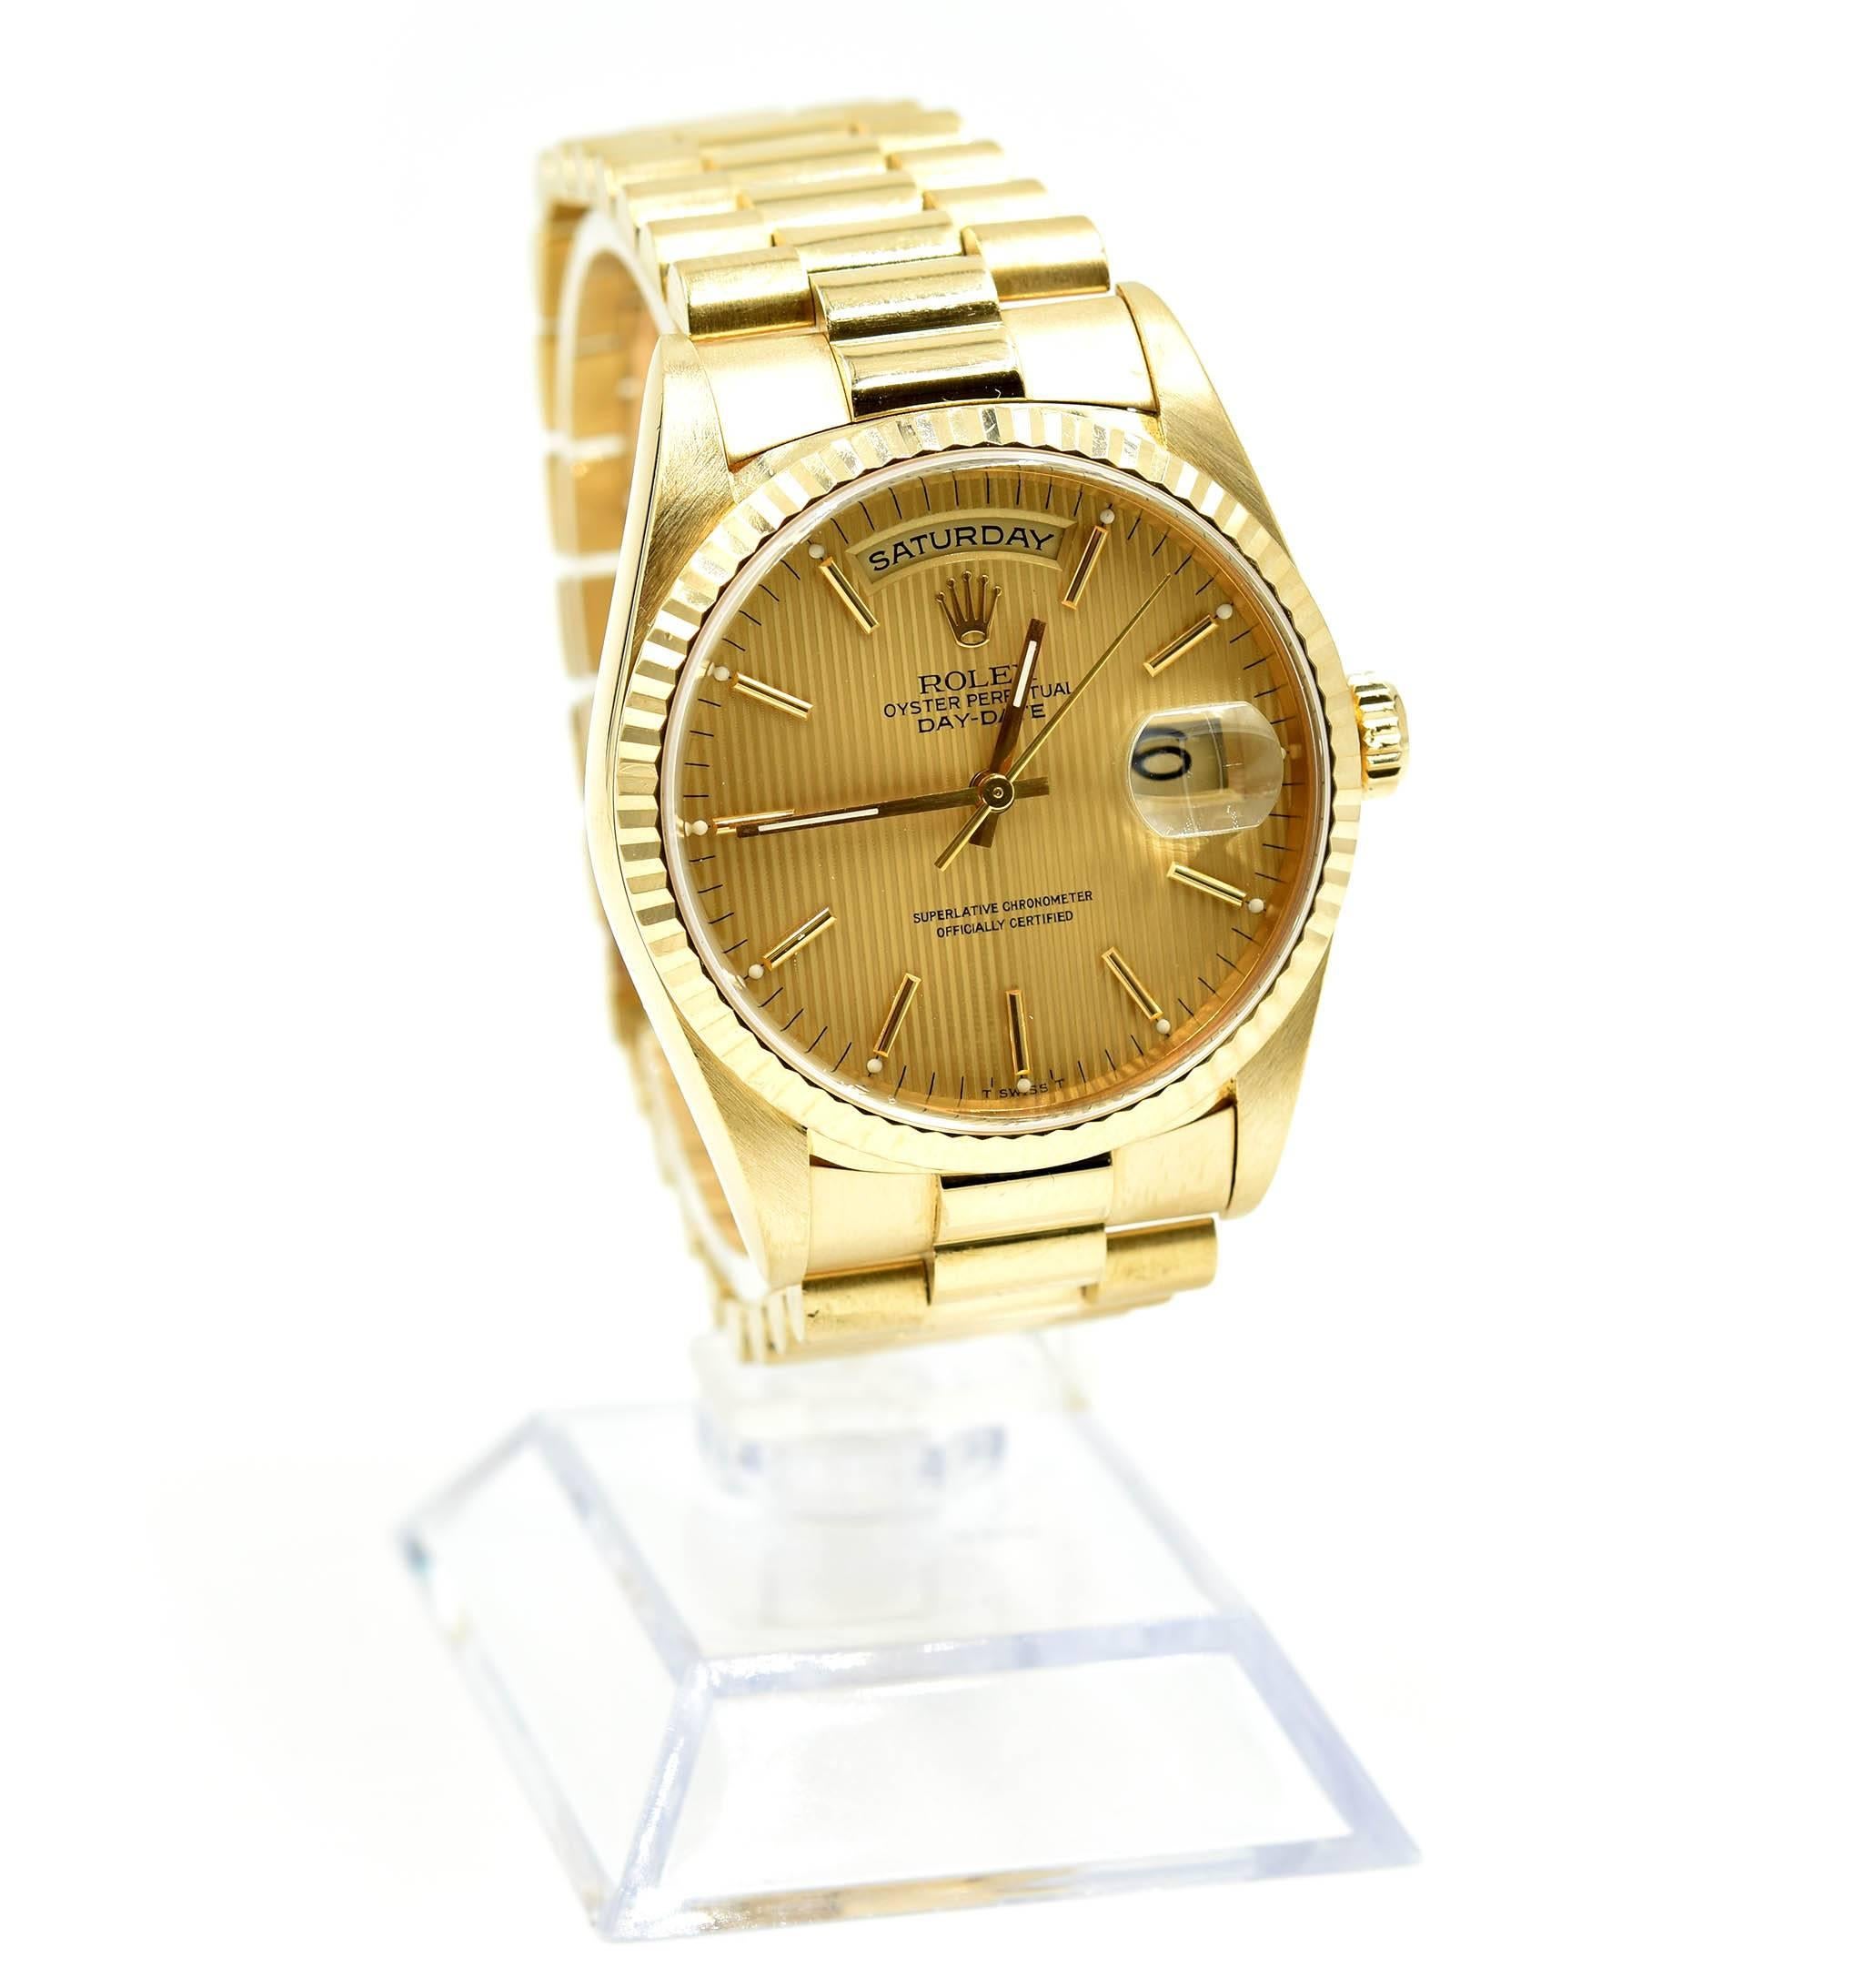 Movement: automatic 3155 movement w/ double Quickset feature
Function: hours, minutes, seconds, day, date
Case: 36mm round 18k yellow gold case with 18k yellow gold fluted bezel, sapphire protective crystal, screw-down crown
Band: 18k yellow gold